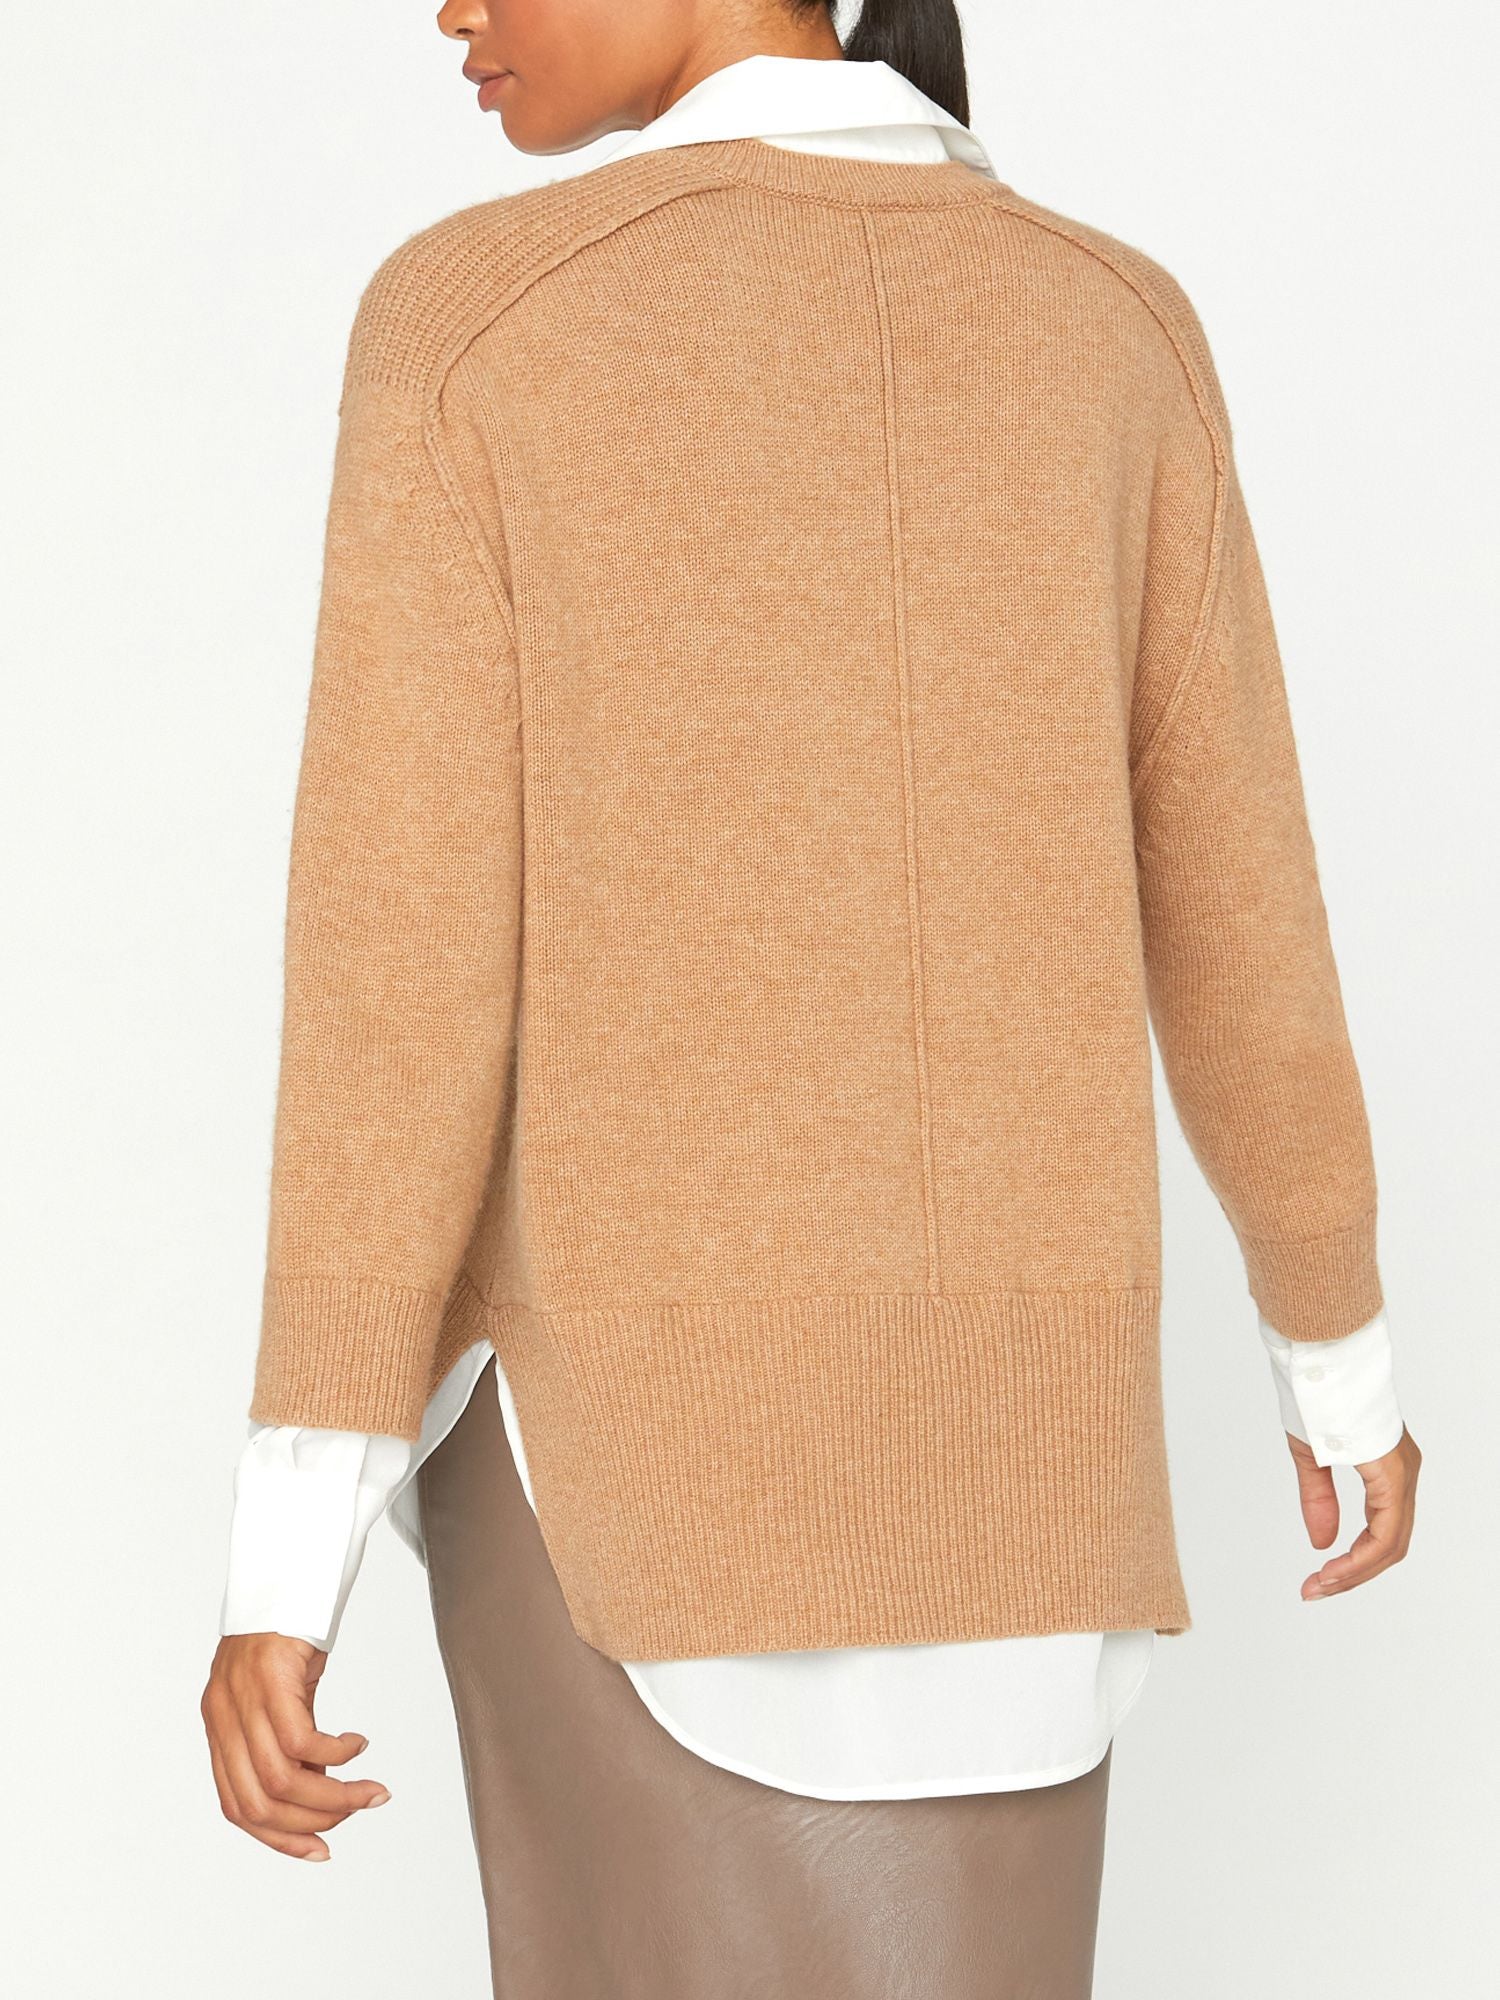 looker tan layered v-neck sweater back view